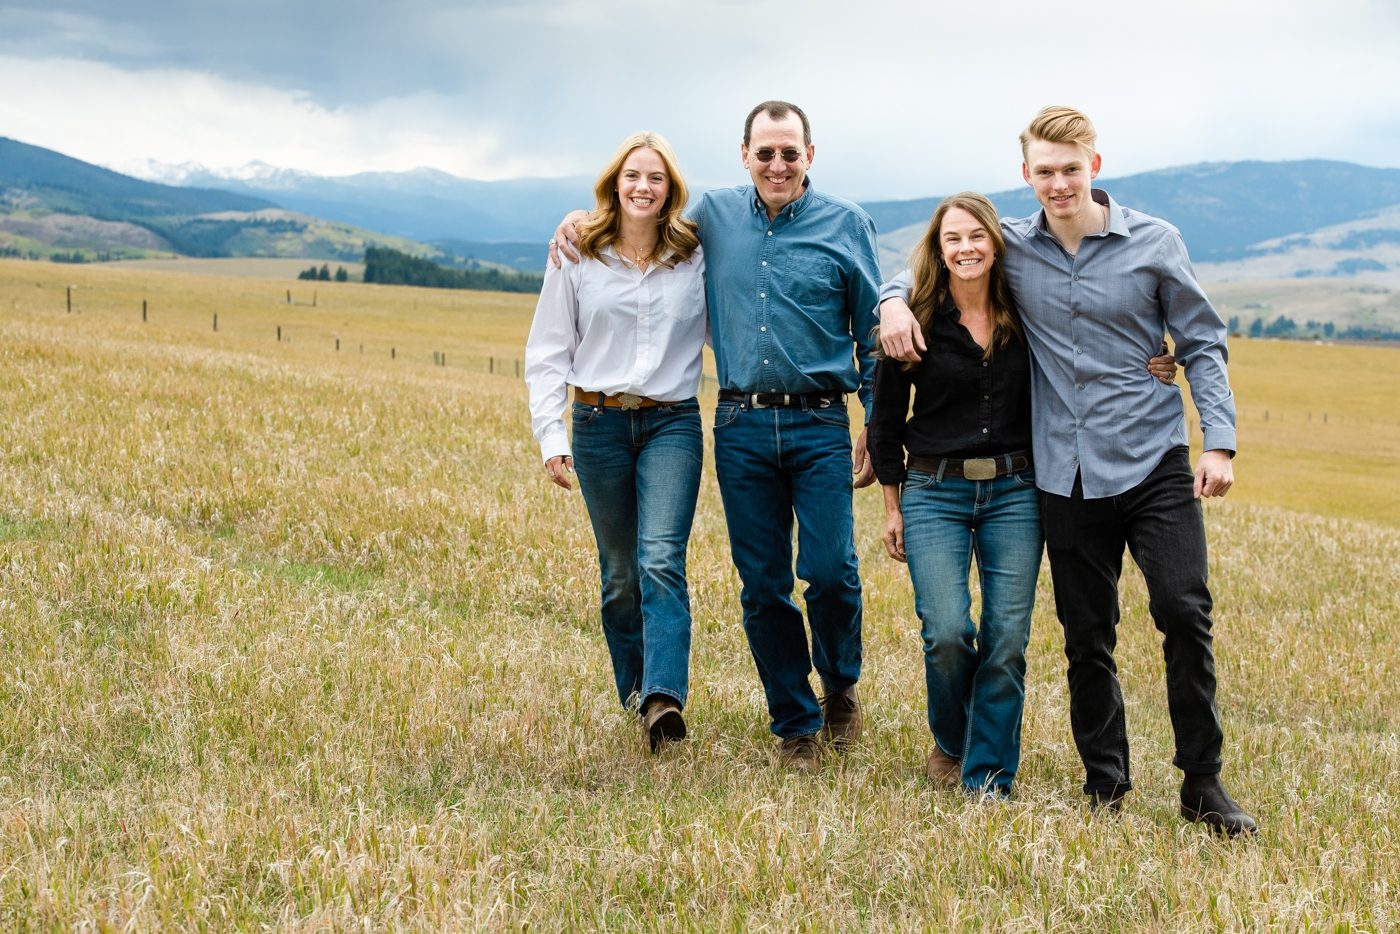 Family-walking-together-in-cloudy-mountain-field